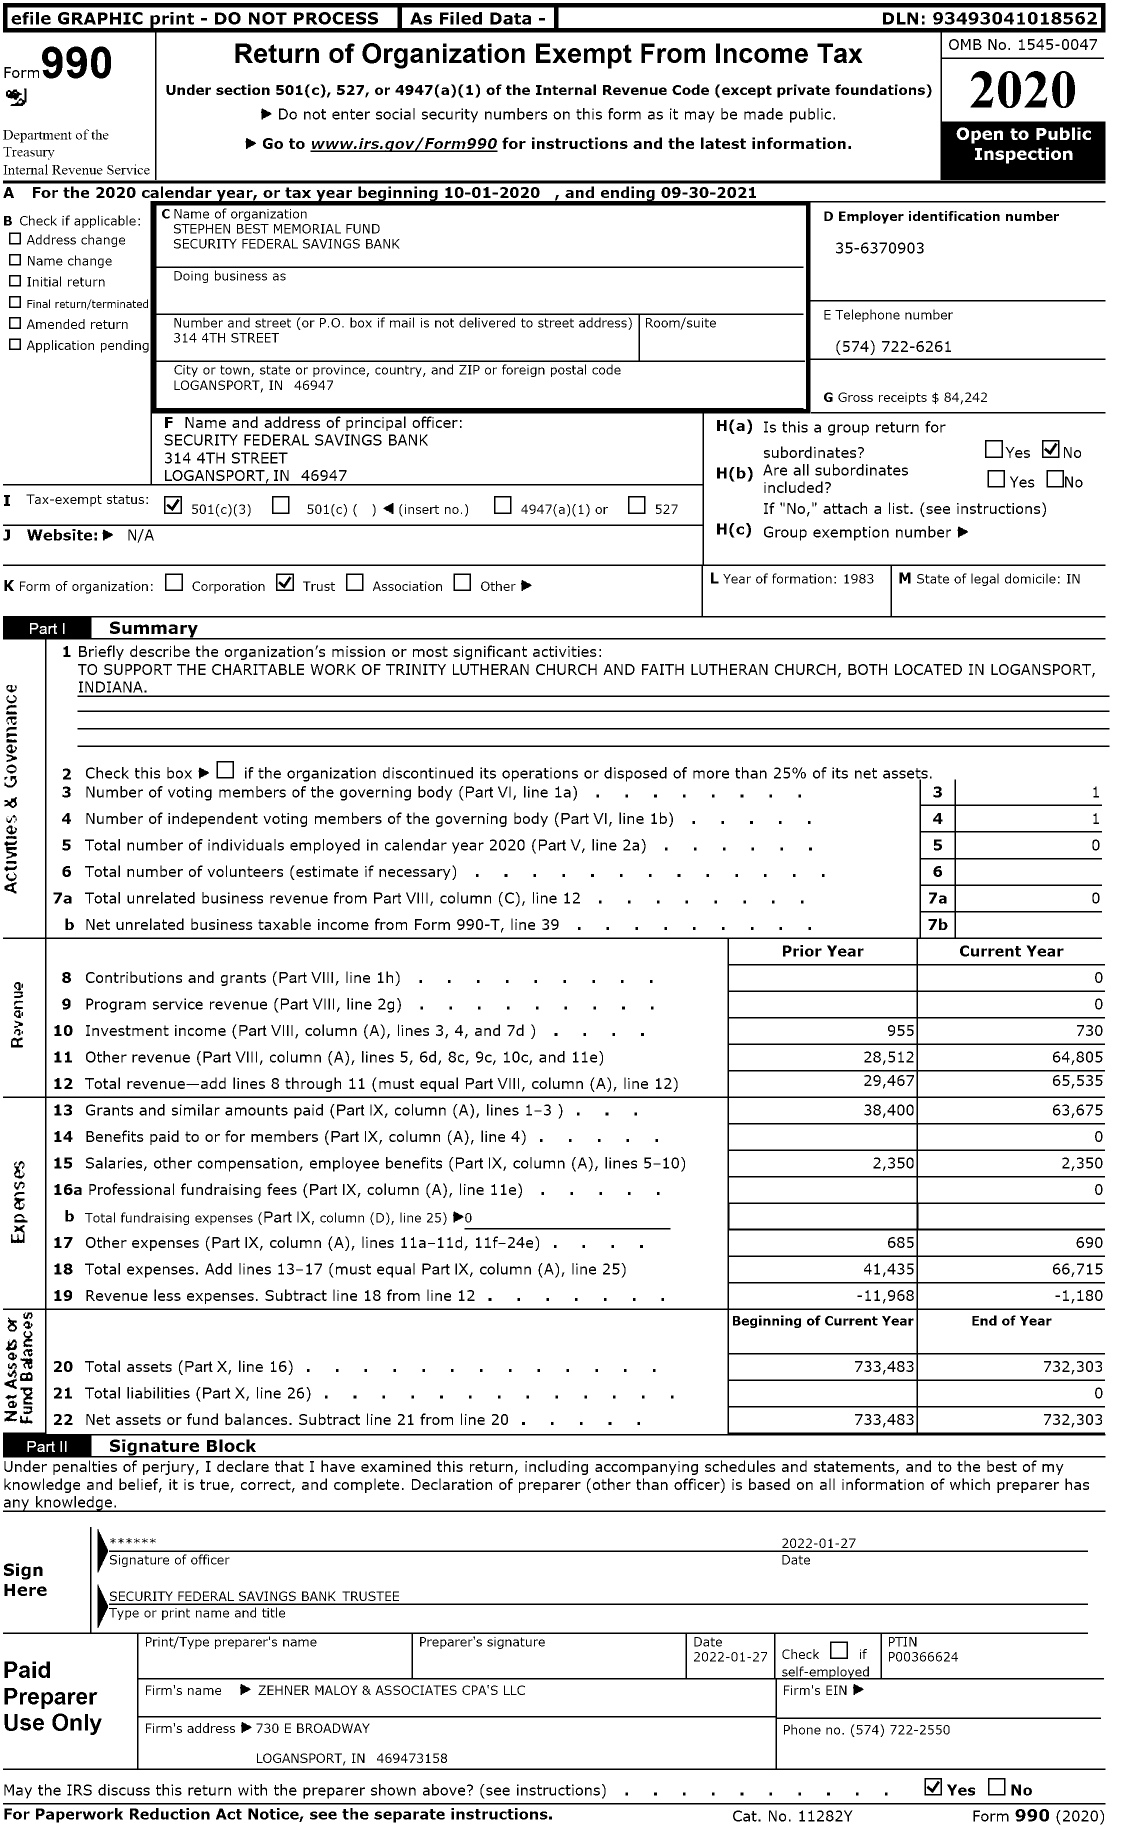 Image of first page of 2020 Form 990 for Stephen Best Memorial Fund Security Federal Savings Bank